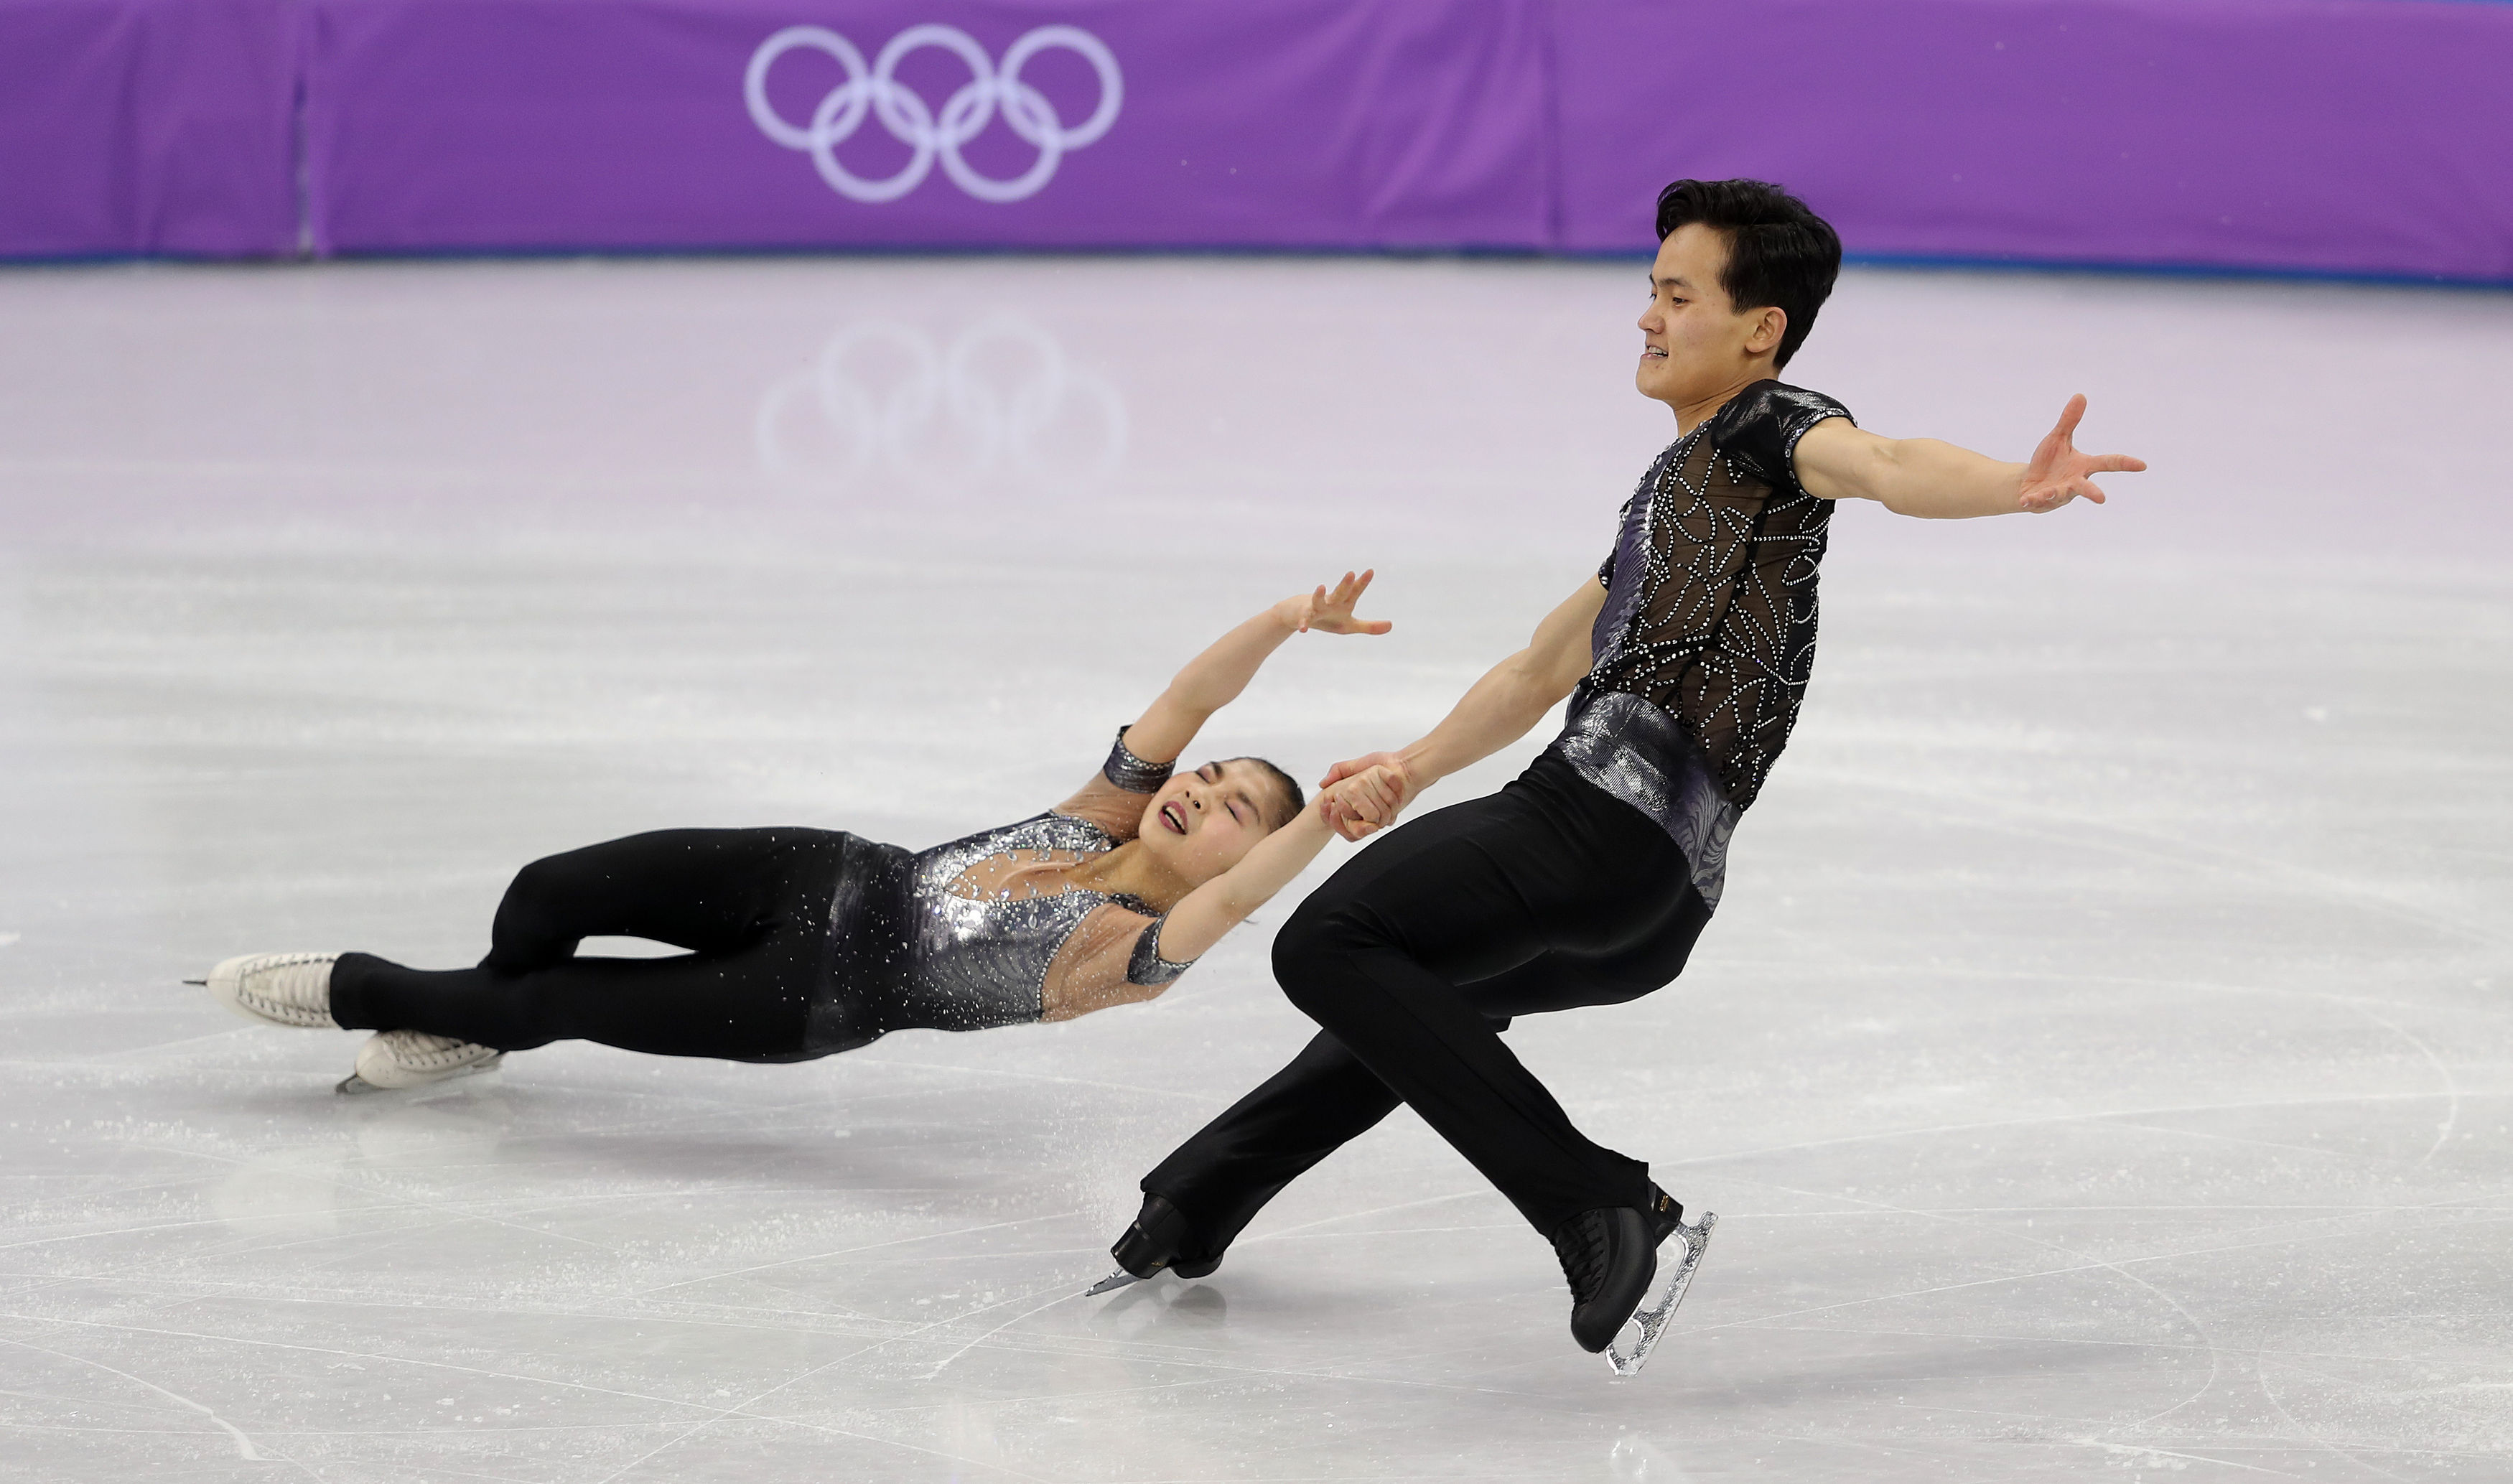 Tae Ok Ryom and Ju Sik Kim of North Korea in the Pairs Figures Skating at the Gangneung Ice Arena during day five of the PyeongChang 2018 Winter Olympic Games in South Korea. (David Davies—PA Images/Getty Images)